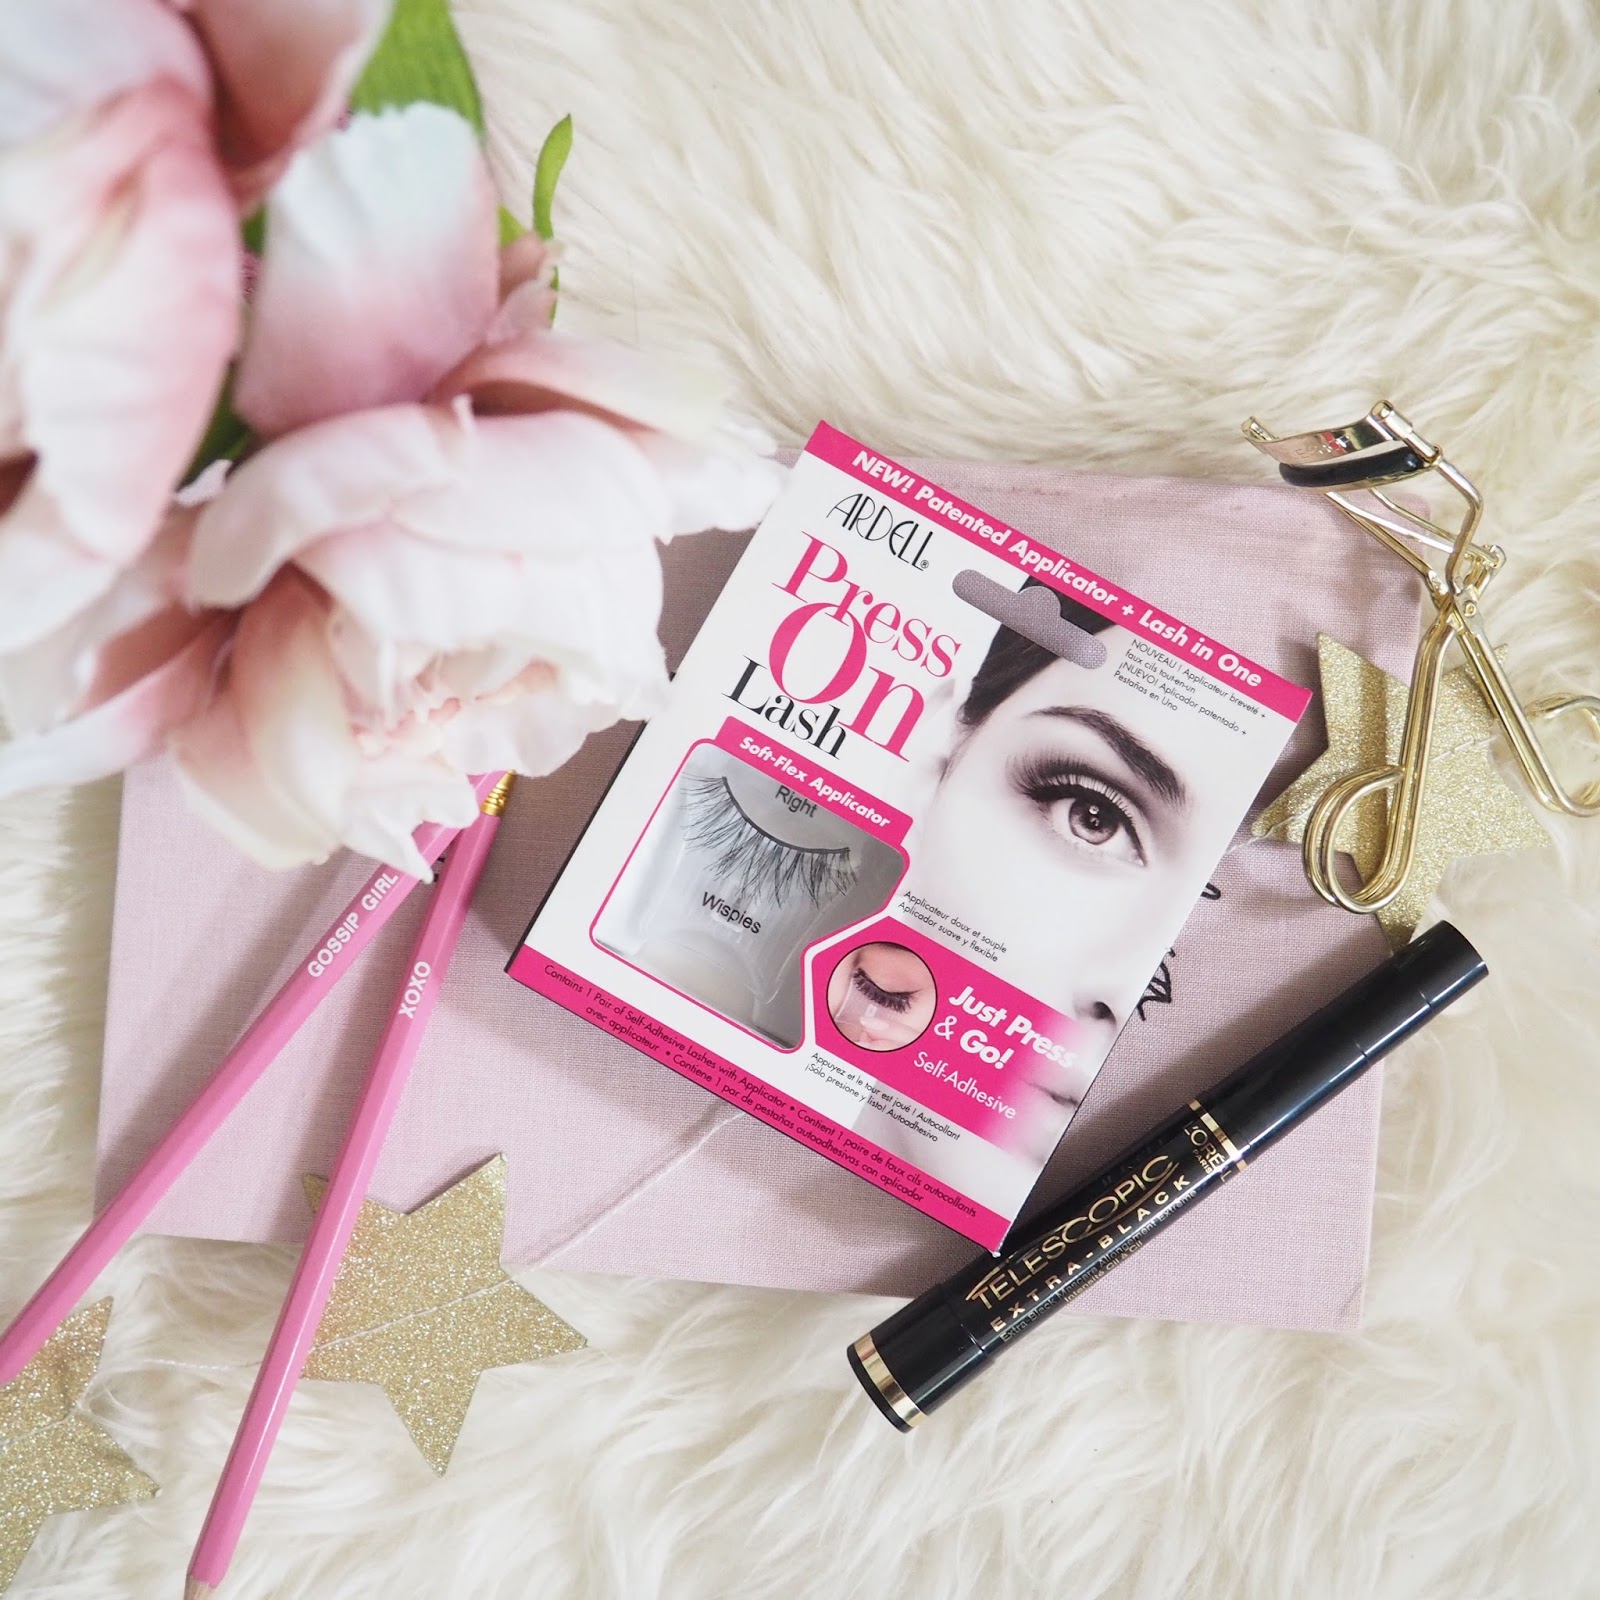 ardell wispie lashes uk, myfalseeyelashes review, Wardell lash review, stick on lash review, blogger mail, Easy + Cheap Way For Natural Looking Lashes, false eyelash help, natural looking lashes